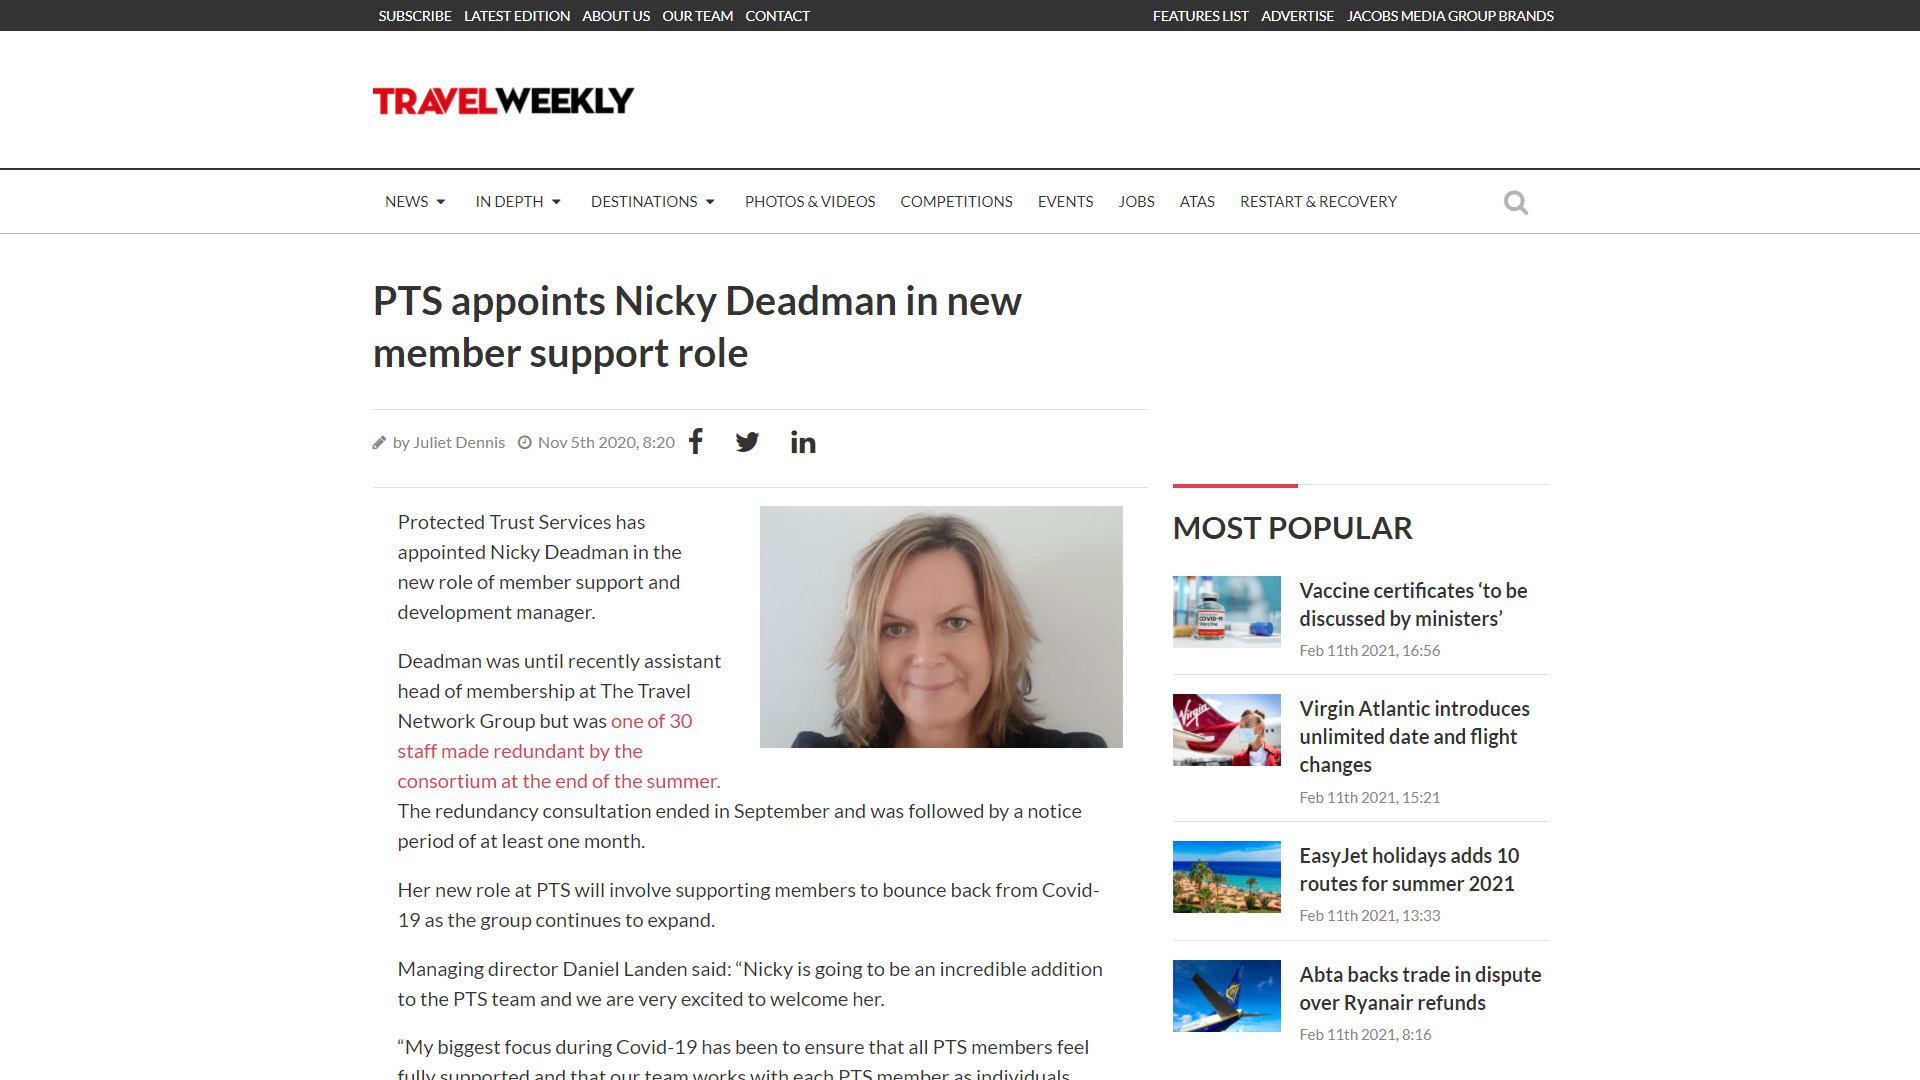 PTS Appoints Nicky Deadman in New Member Support Role